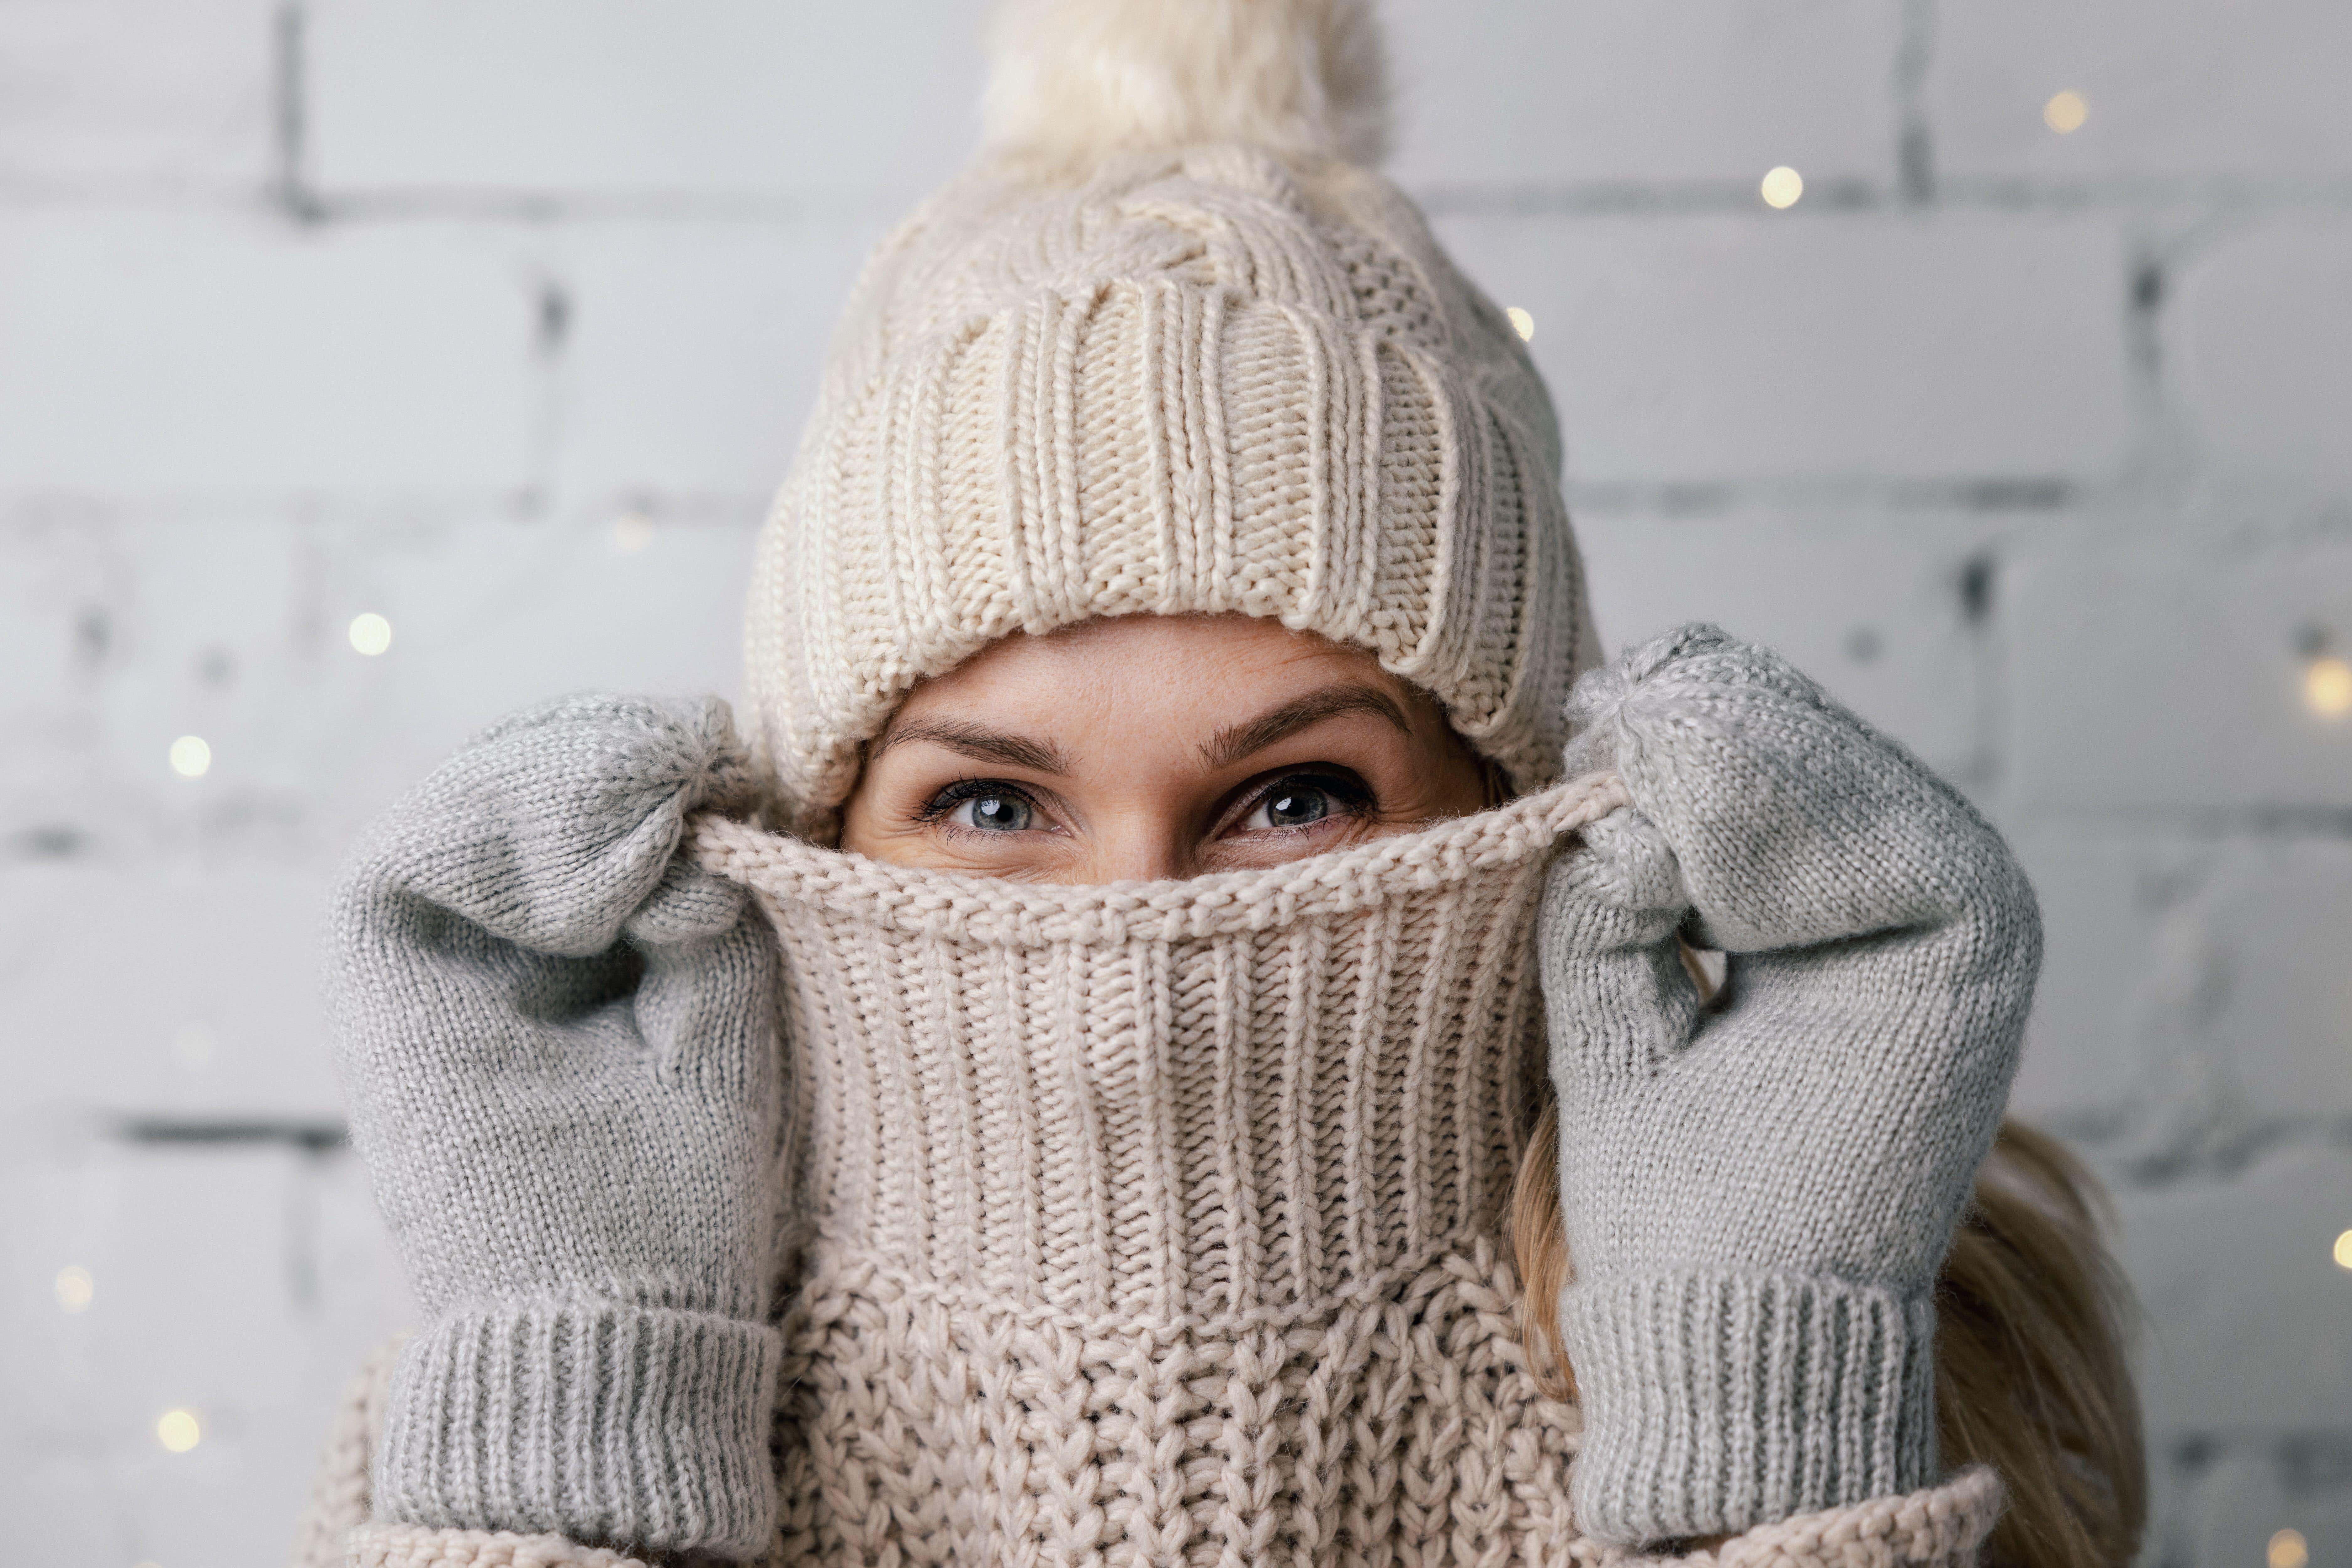 7 clever clothing hacks to help you keep warm in the cold | The Independent